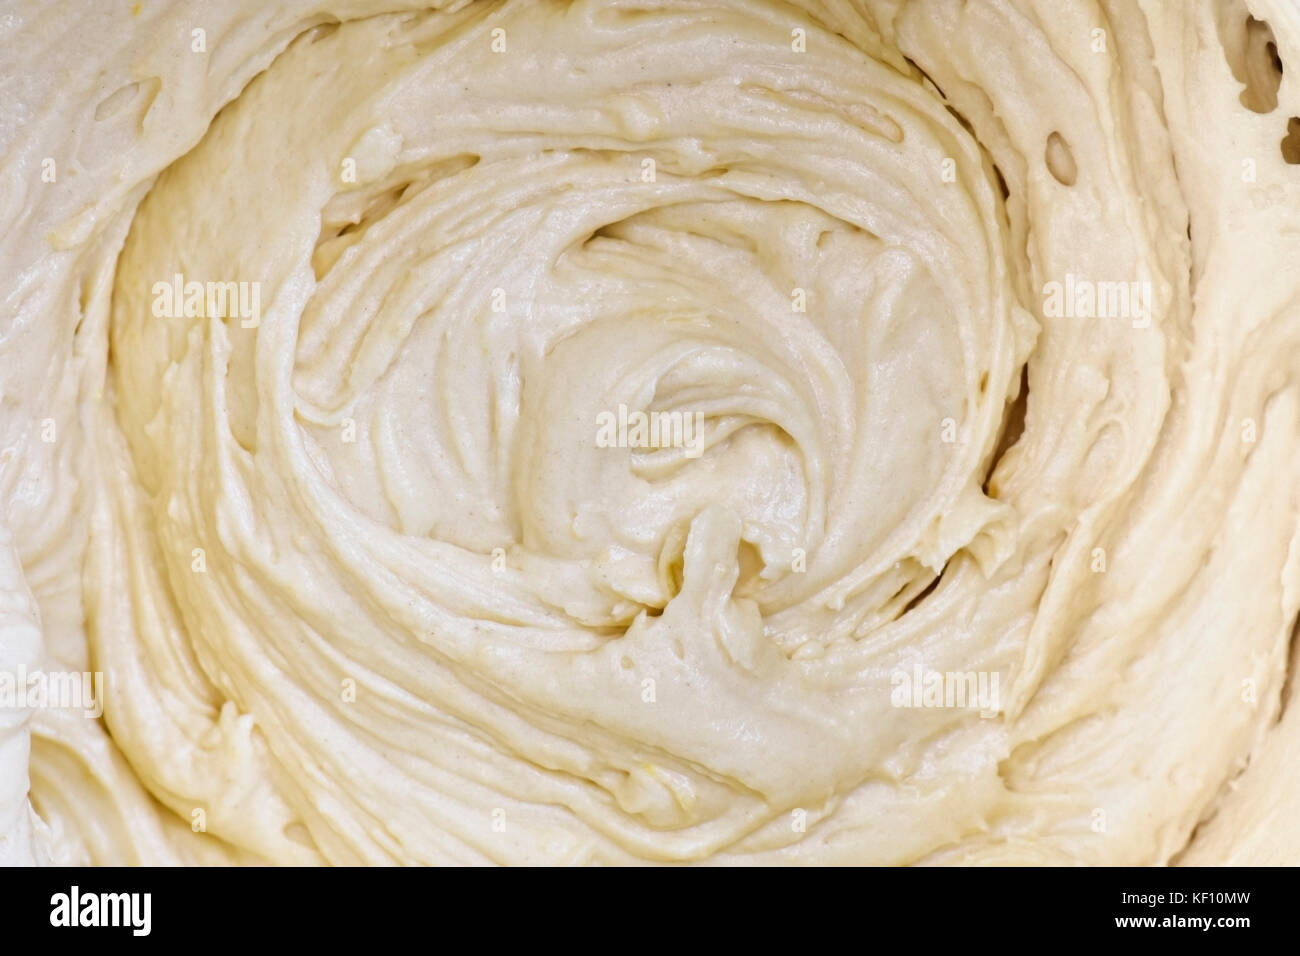 View from above of sponge cake mixture Stock Photo